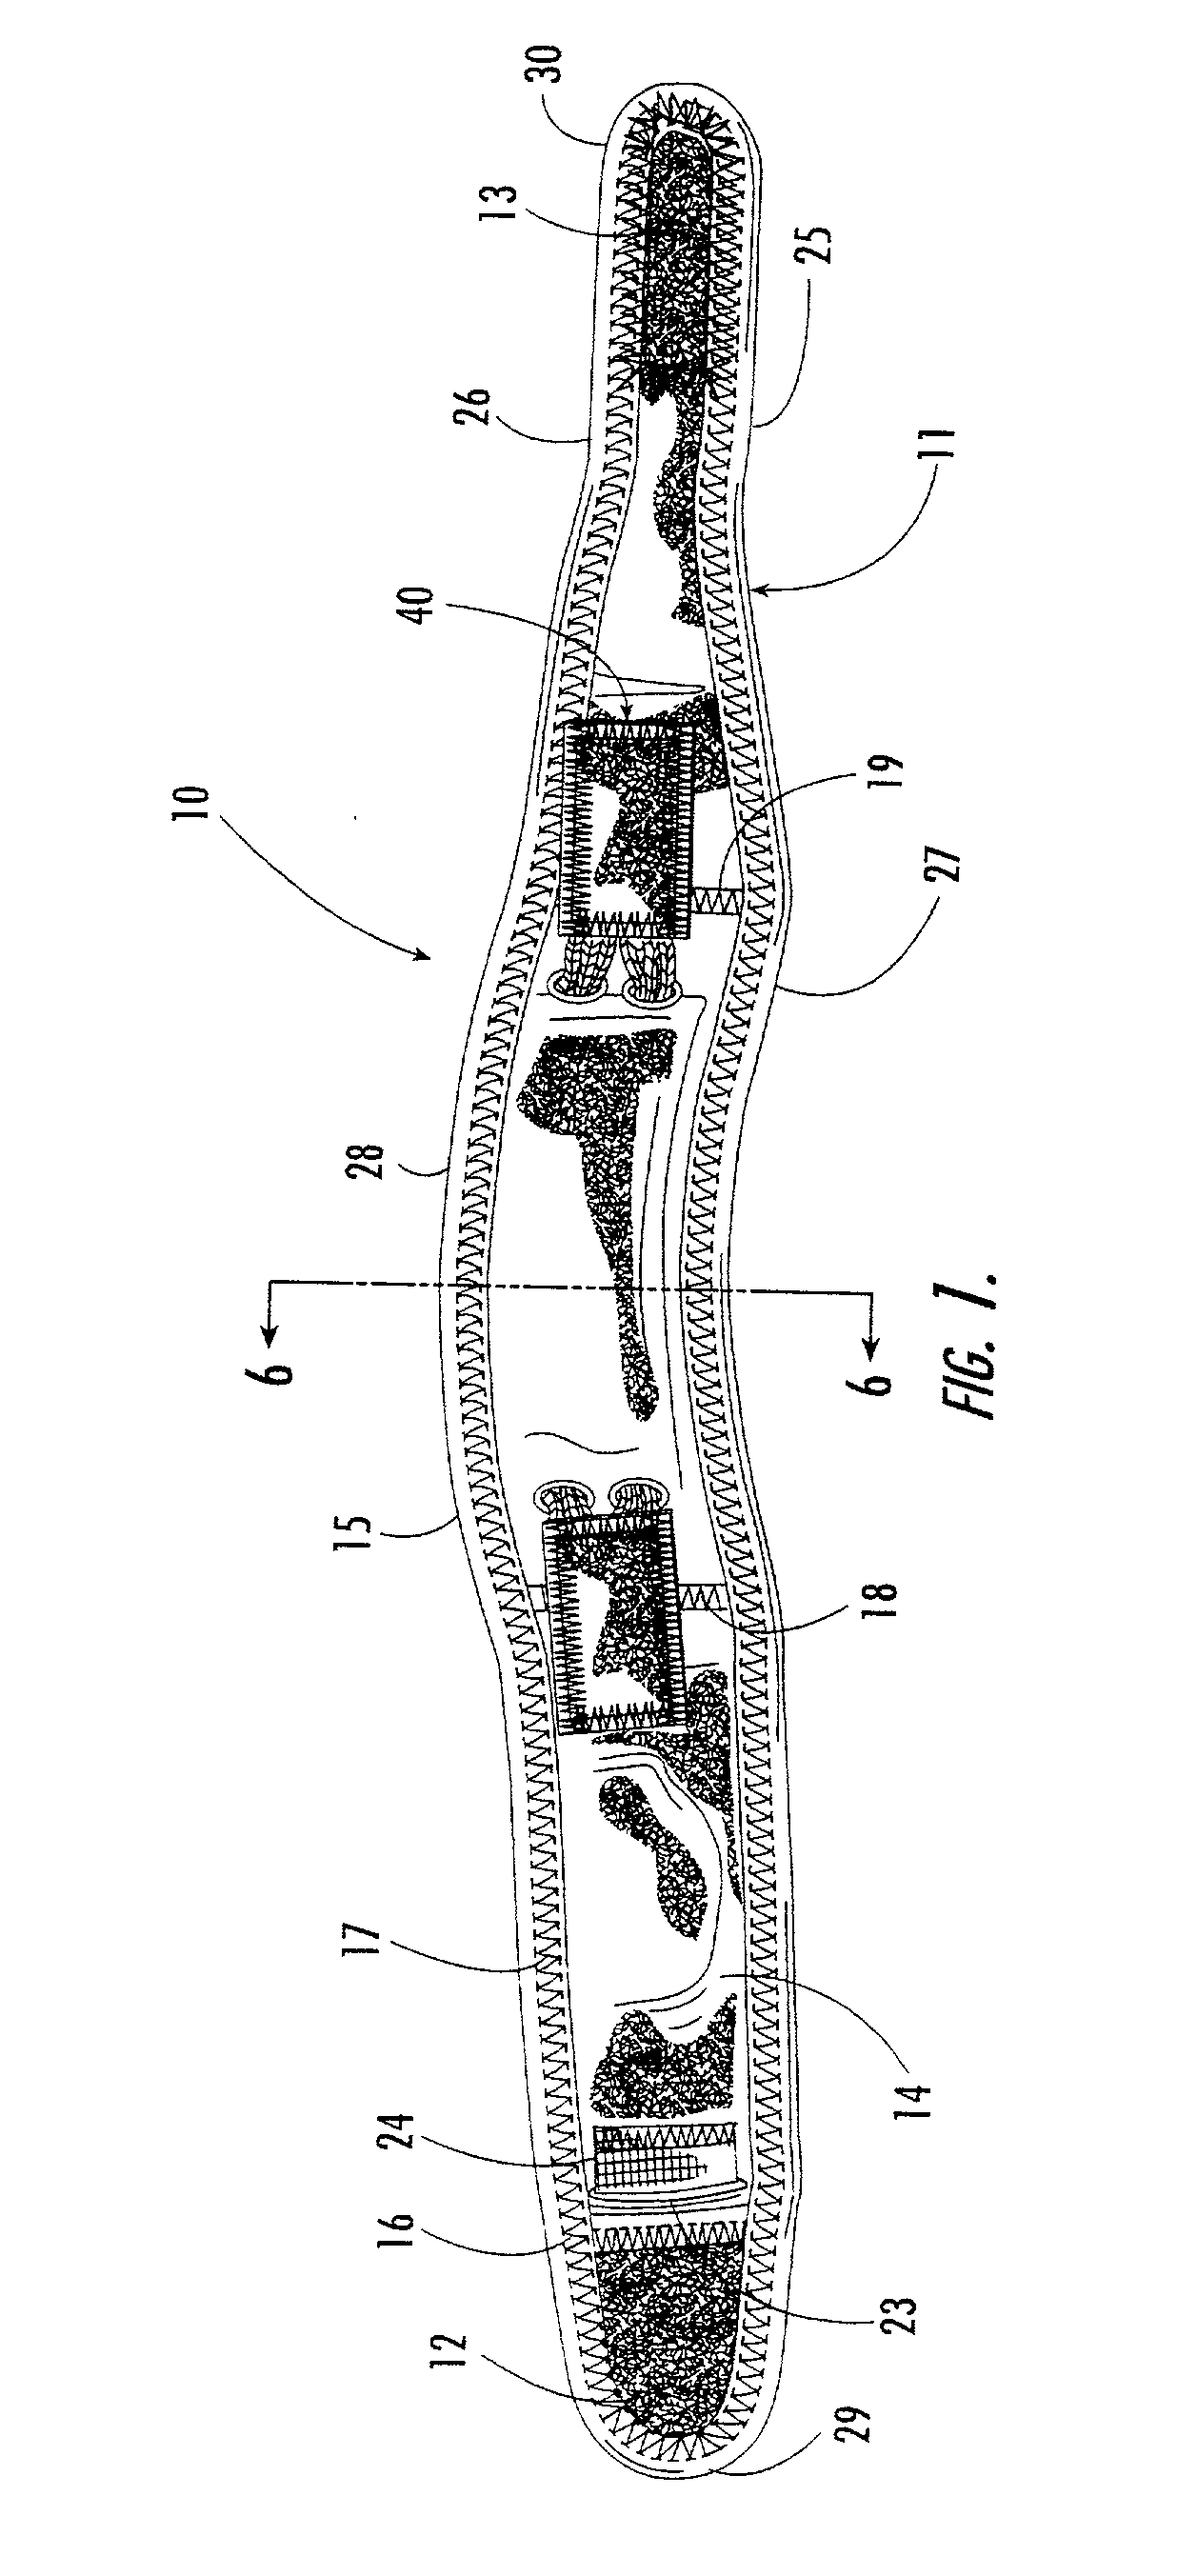 Adjustable support device for the knee